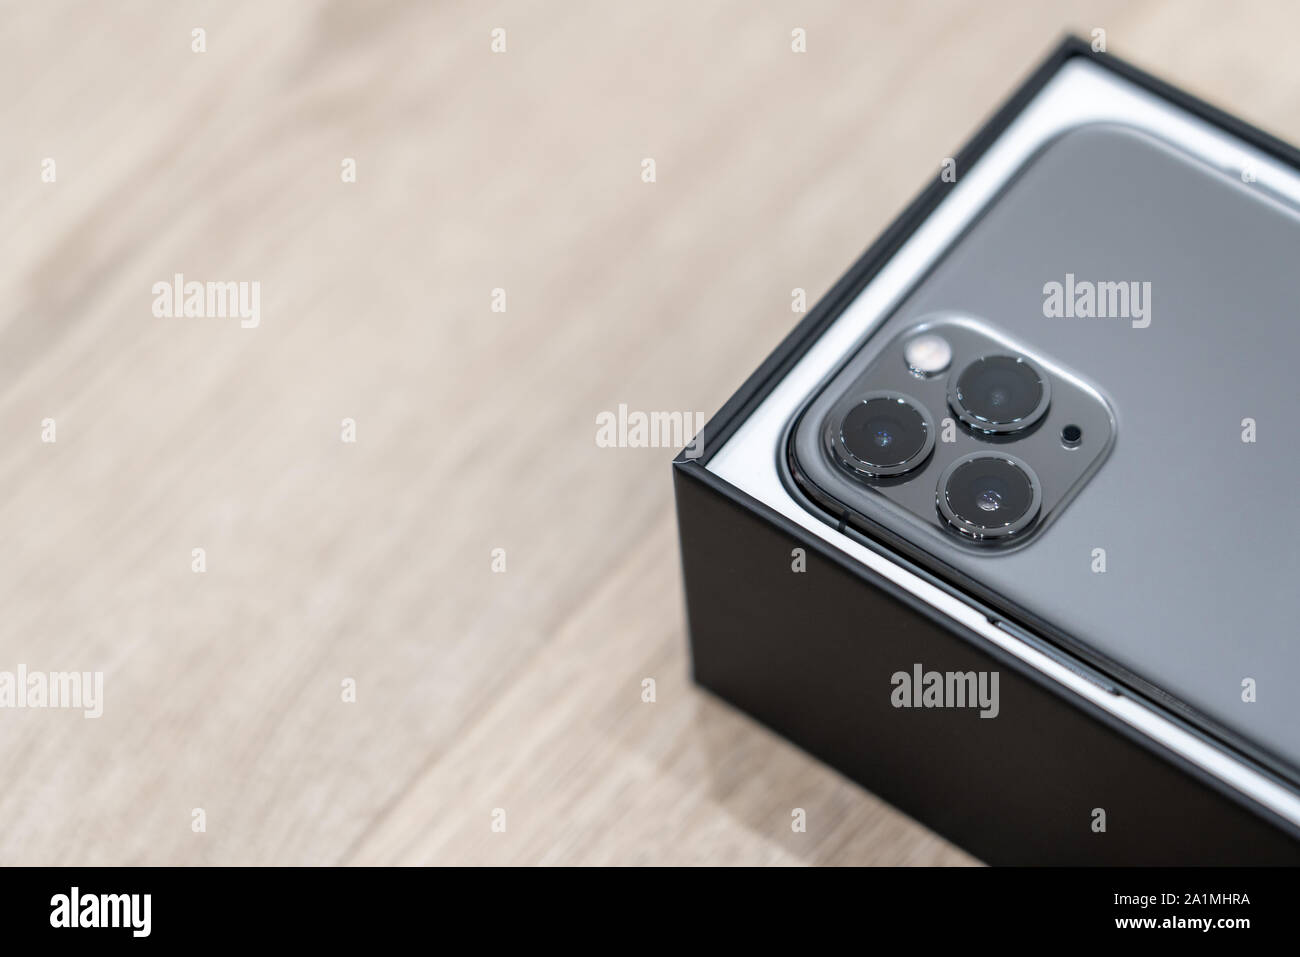 Moscow, Russia - September 24, 2019: new Apple iPhone 11 pro in box on wooden background Stock Photo